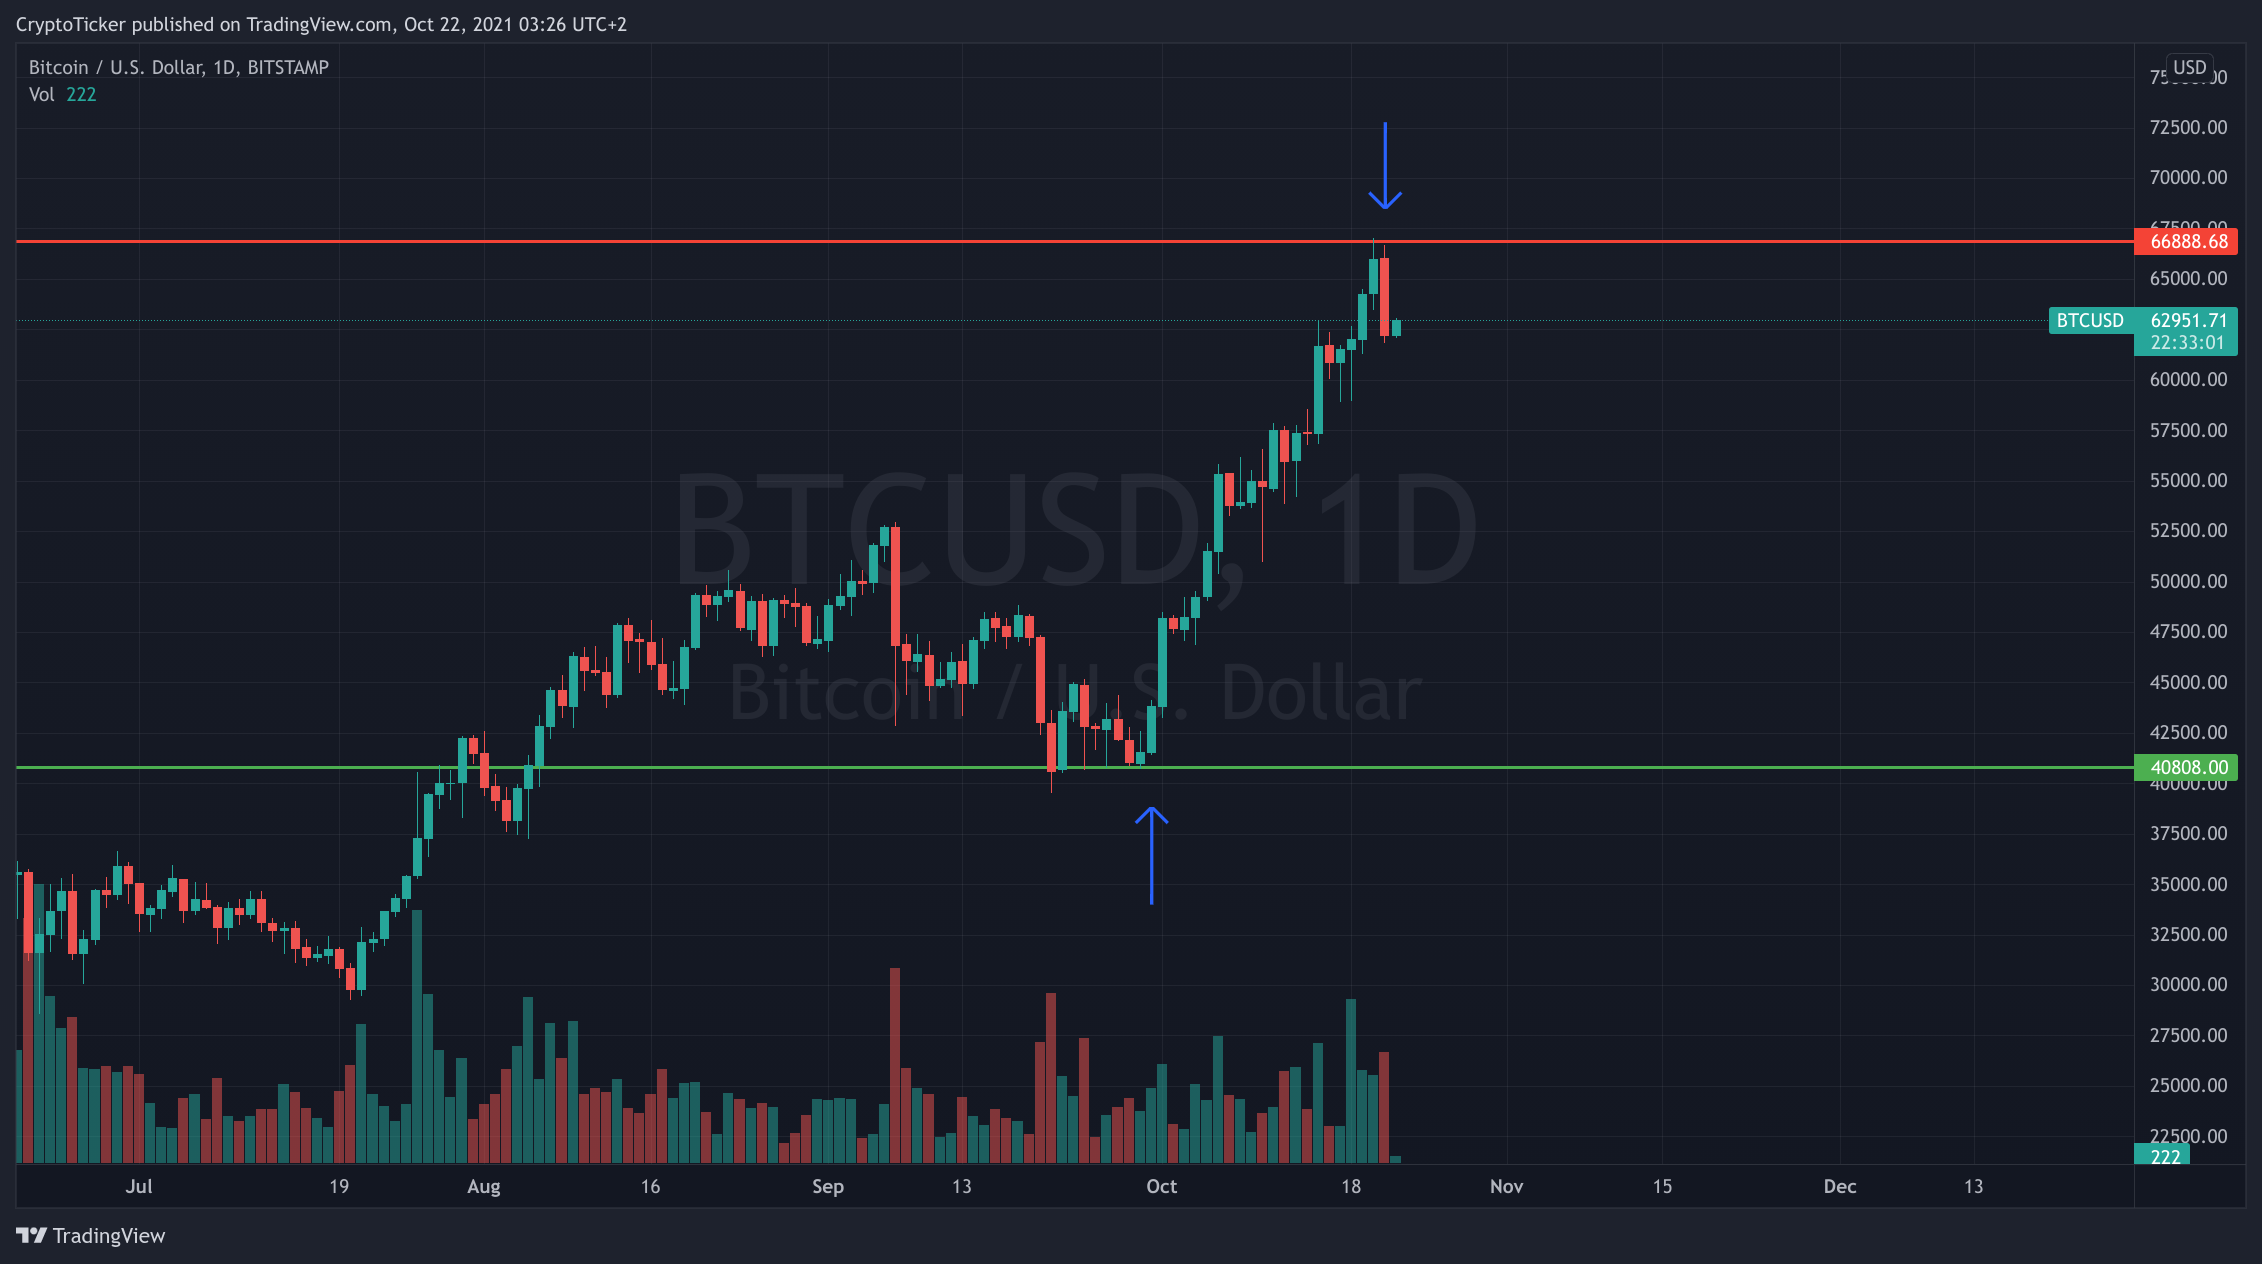 BTC/USD 1-day chart showing the uptrend of BTC